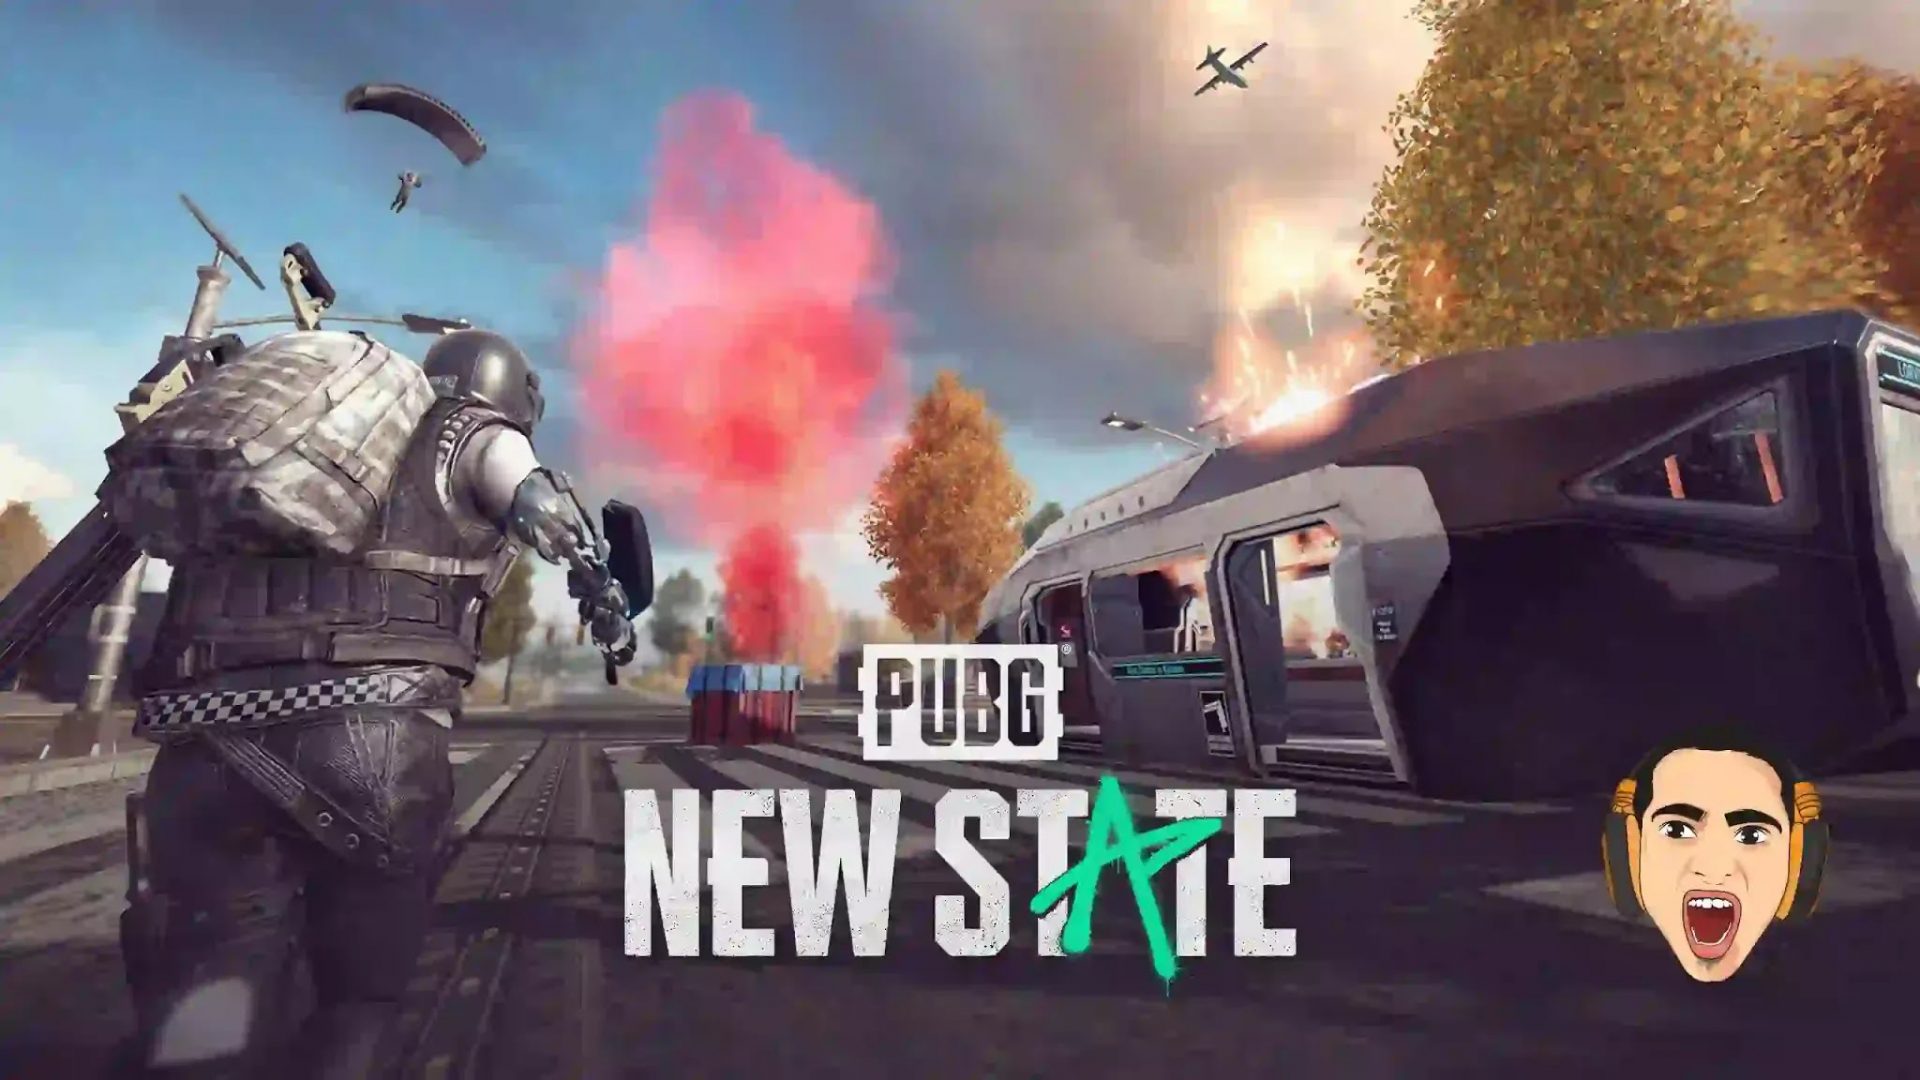 The new update for the game Pubg New State 2021 and the latest features and additions